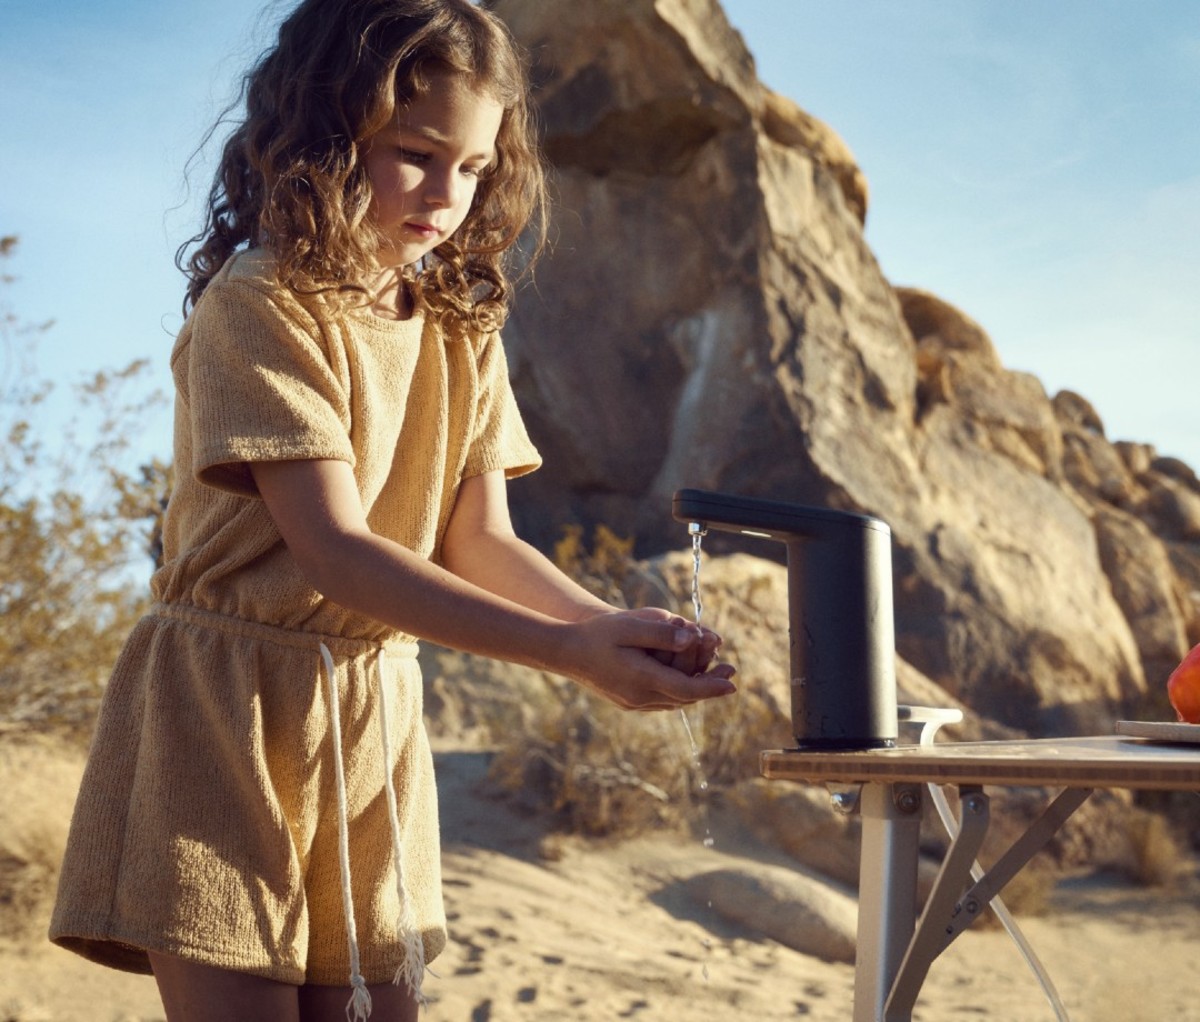 Little caucasian girl with brown curly hair using portable faucet to wash hands